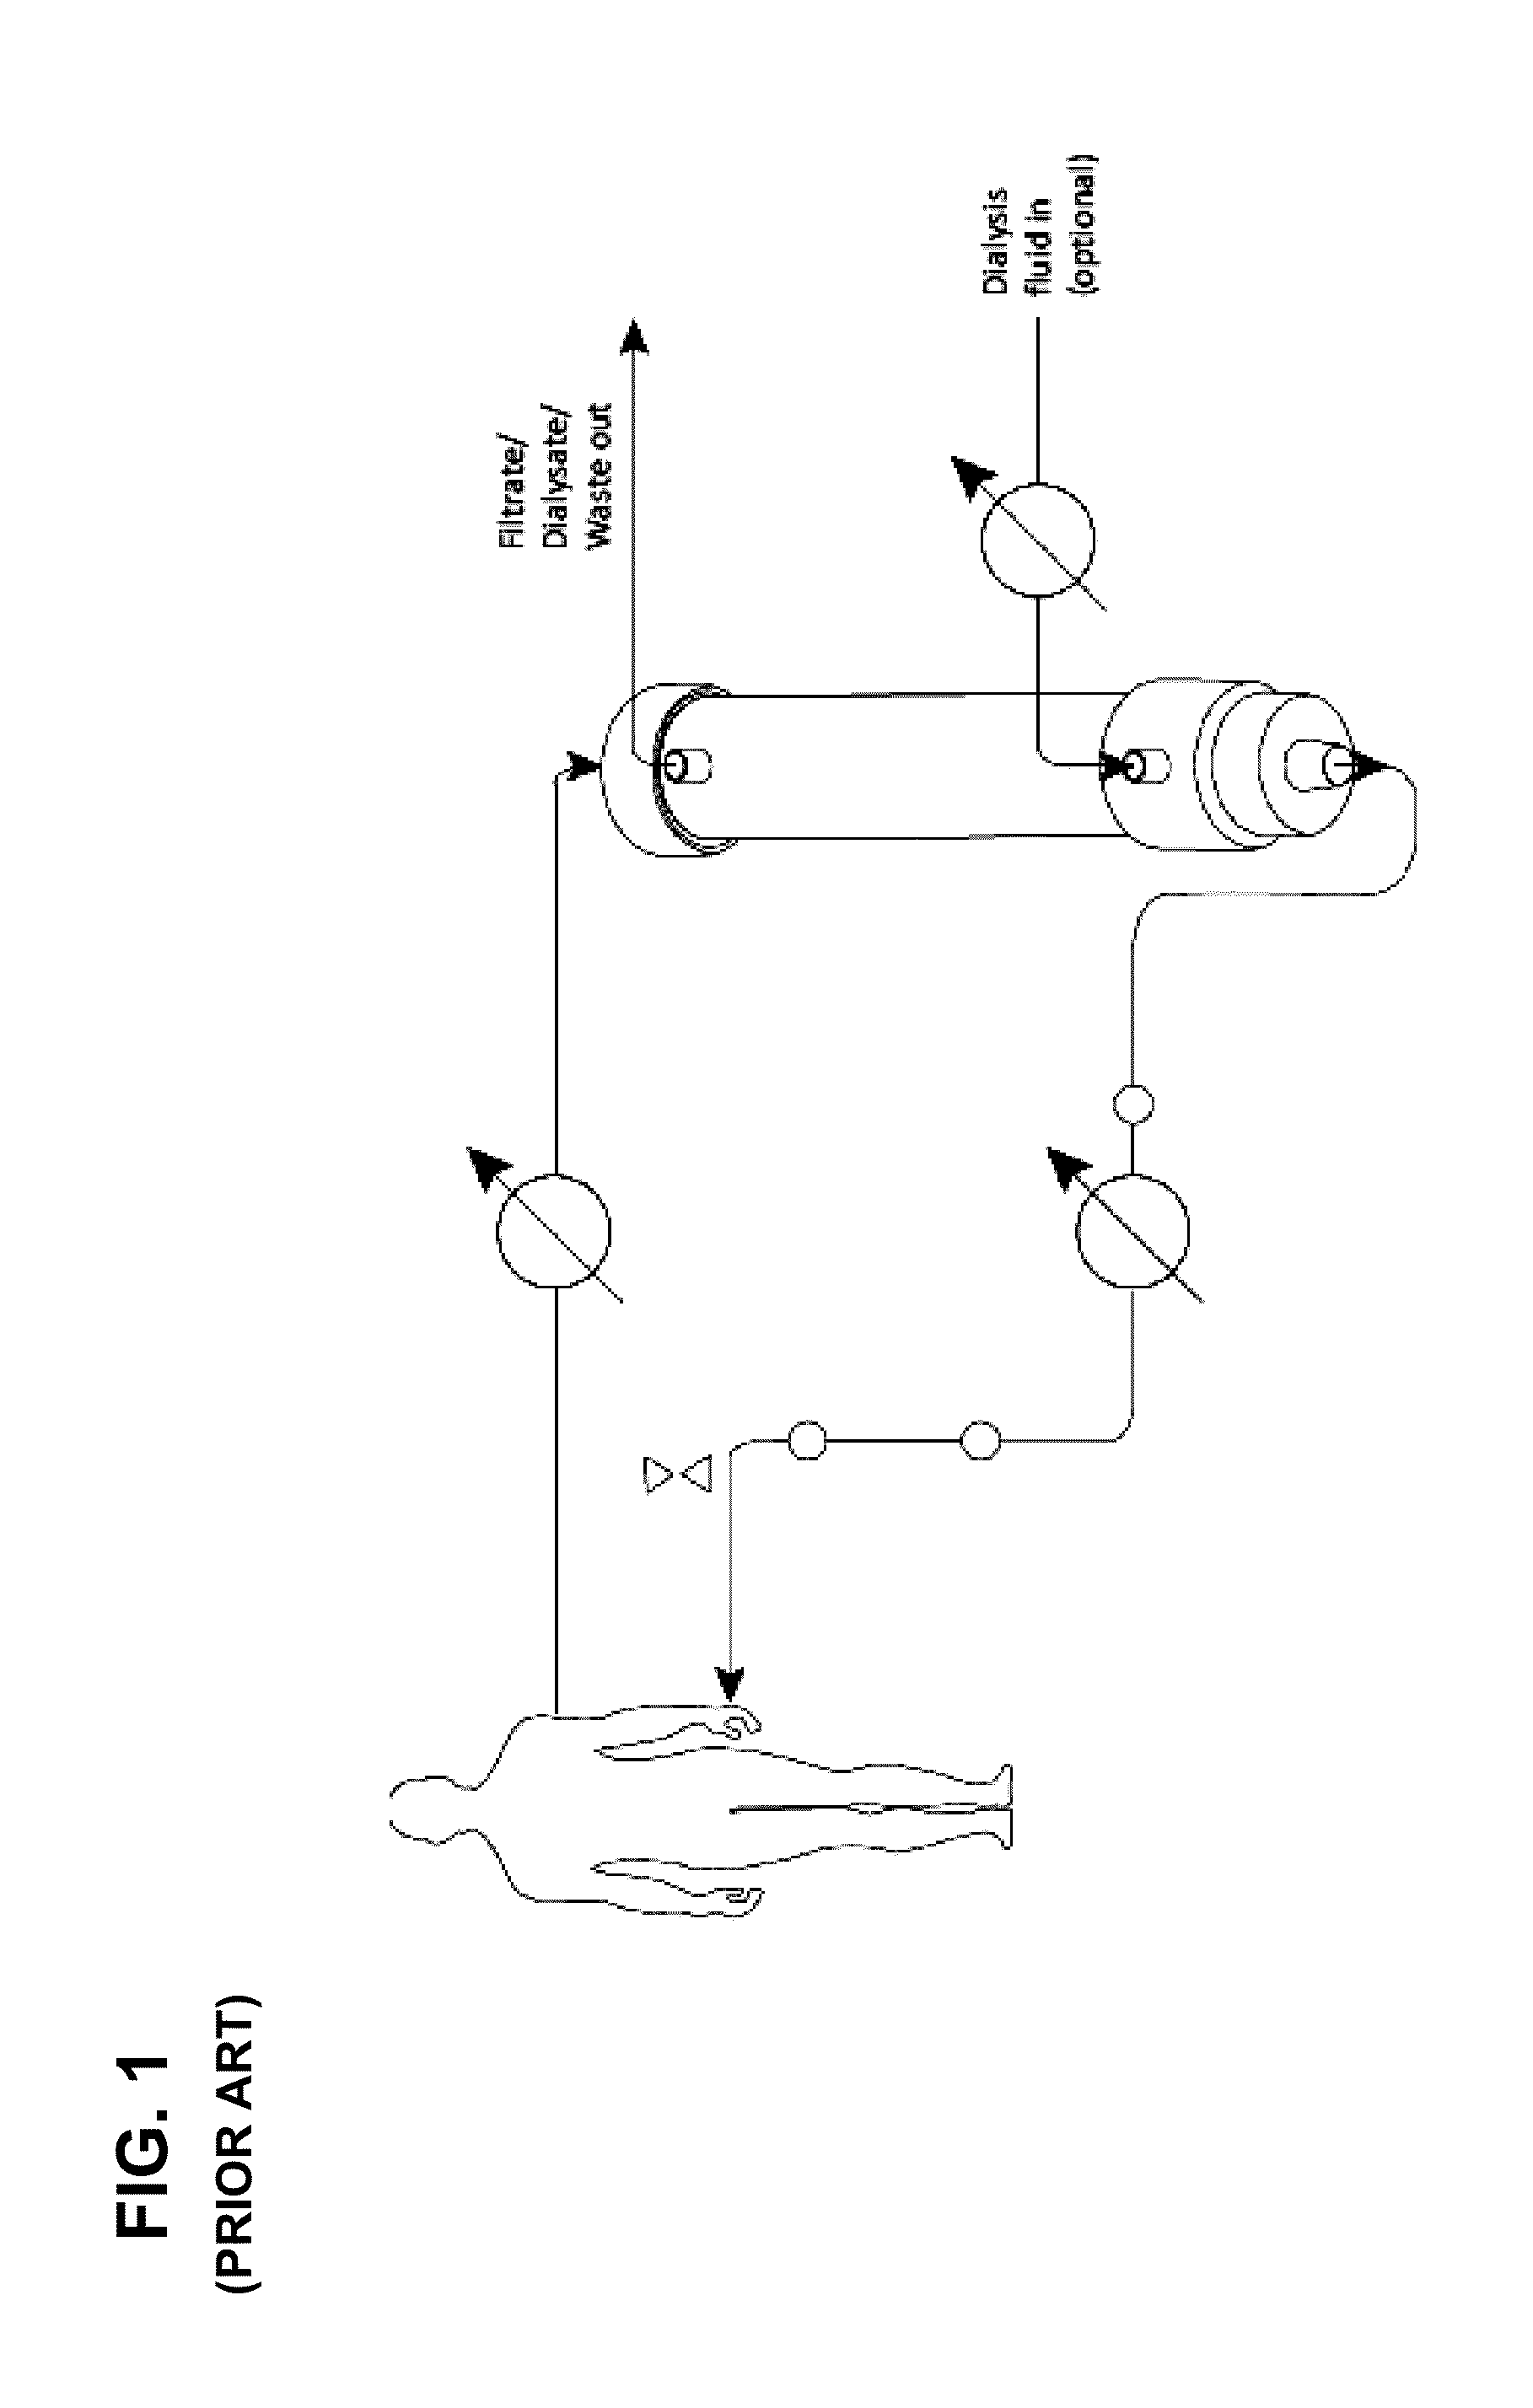 Blood processing cartridges and systems, and methods for extracorporeal blood therapies